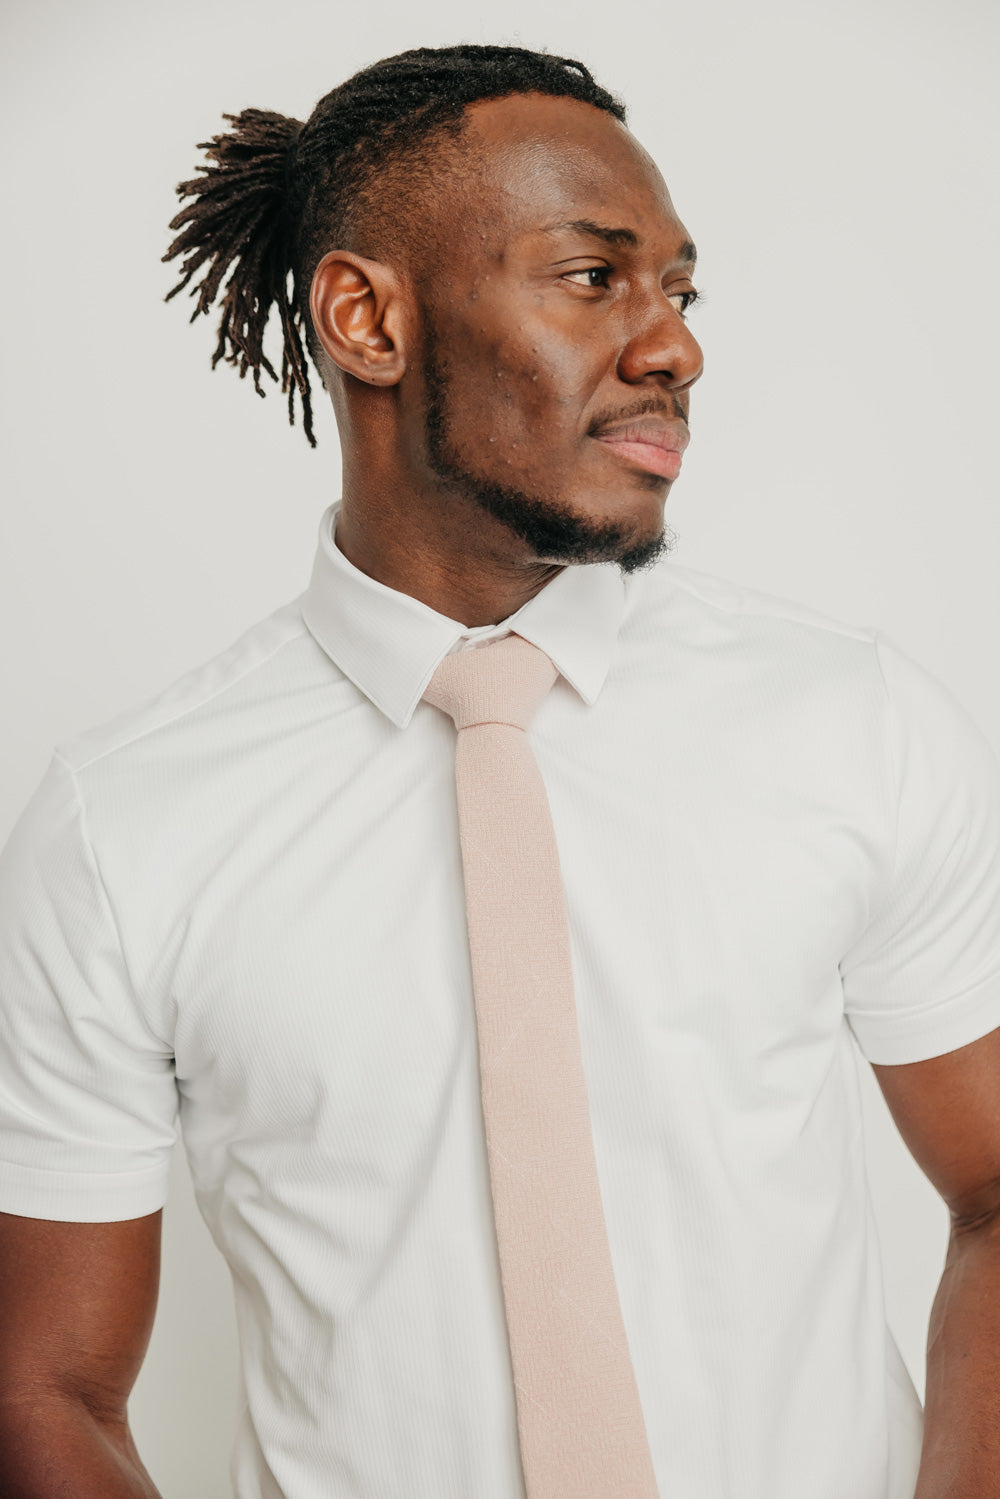 Mauve tie worn with a white shirt.